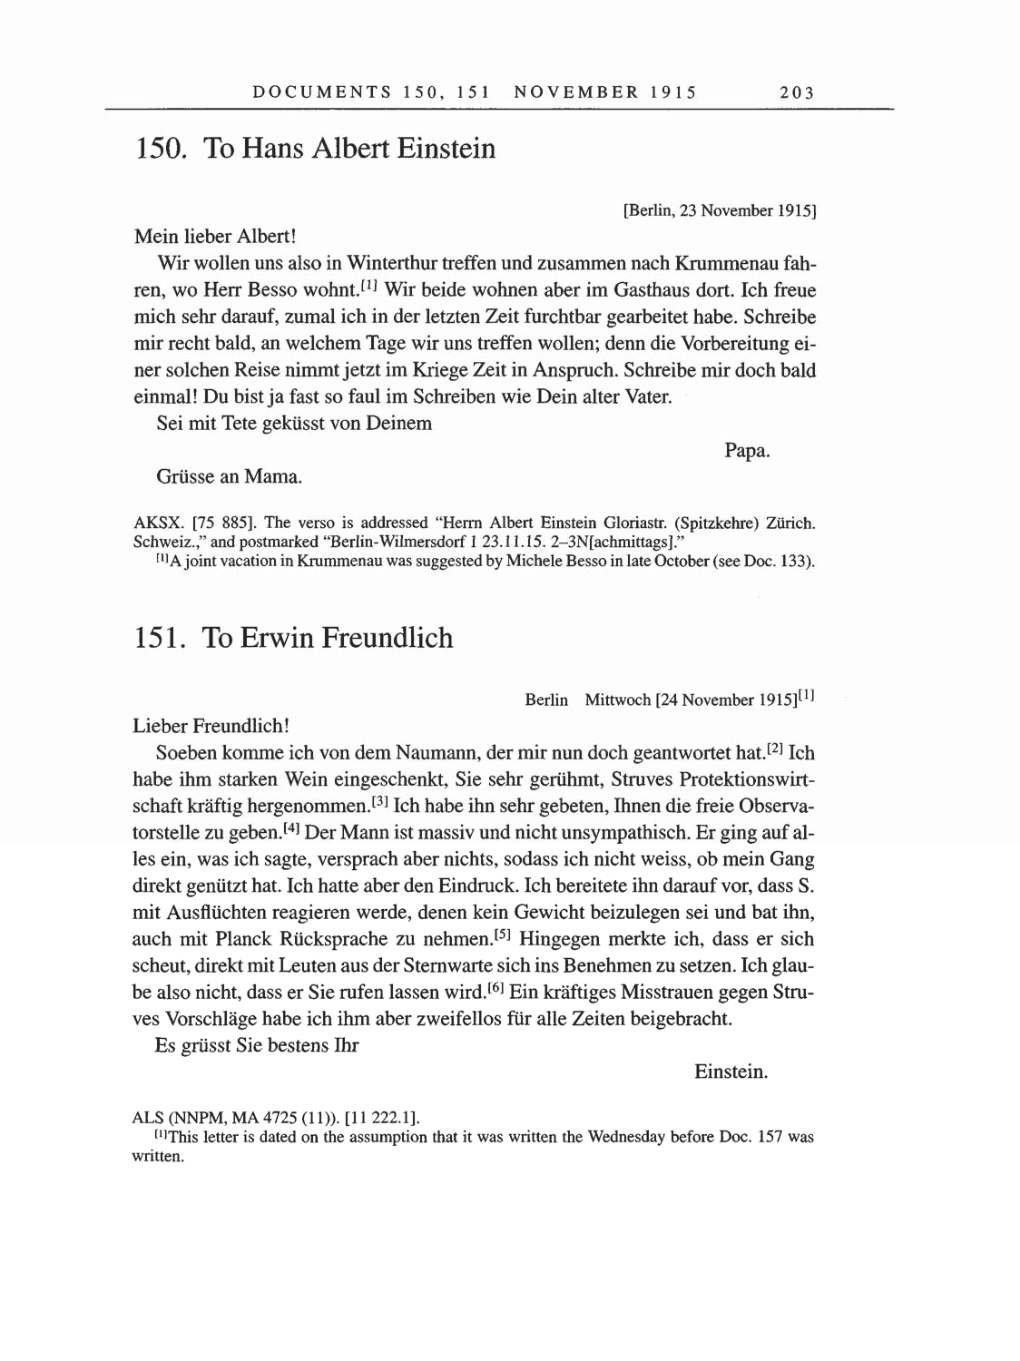 Volume 8, Part A: The Berlin Years: Correspondence 1914-1917 page 203